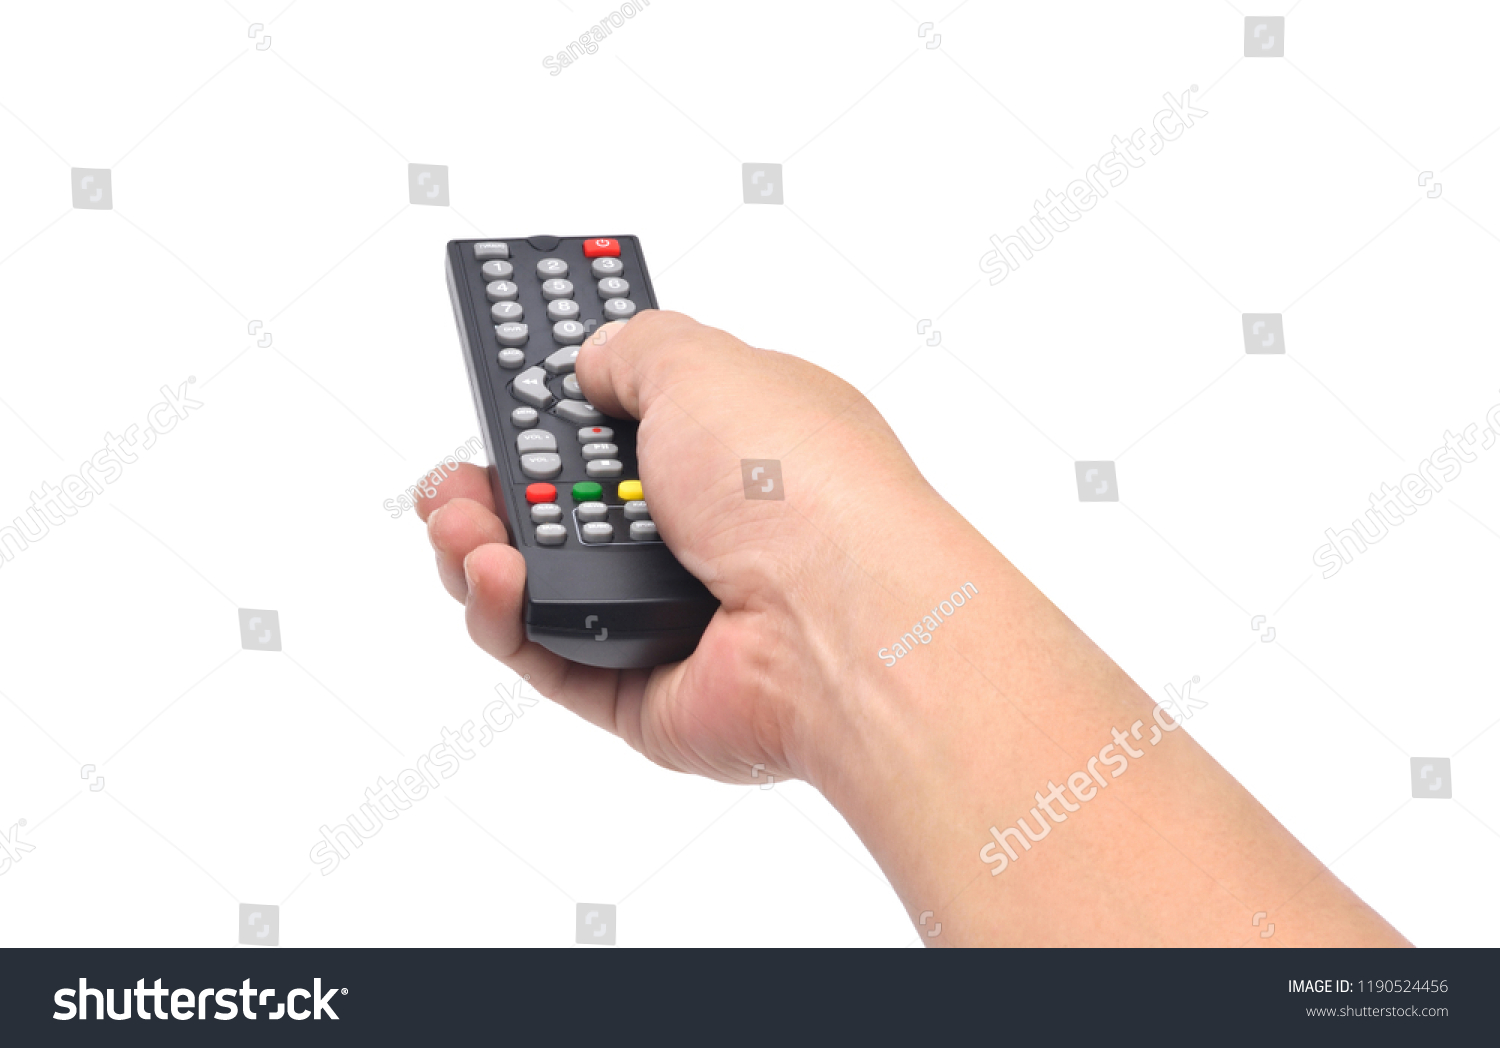 Hand holding television and audio remote control isolate on white background with clipping path #1190524456